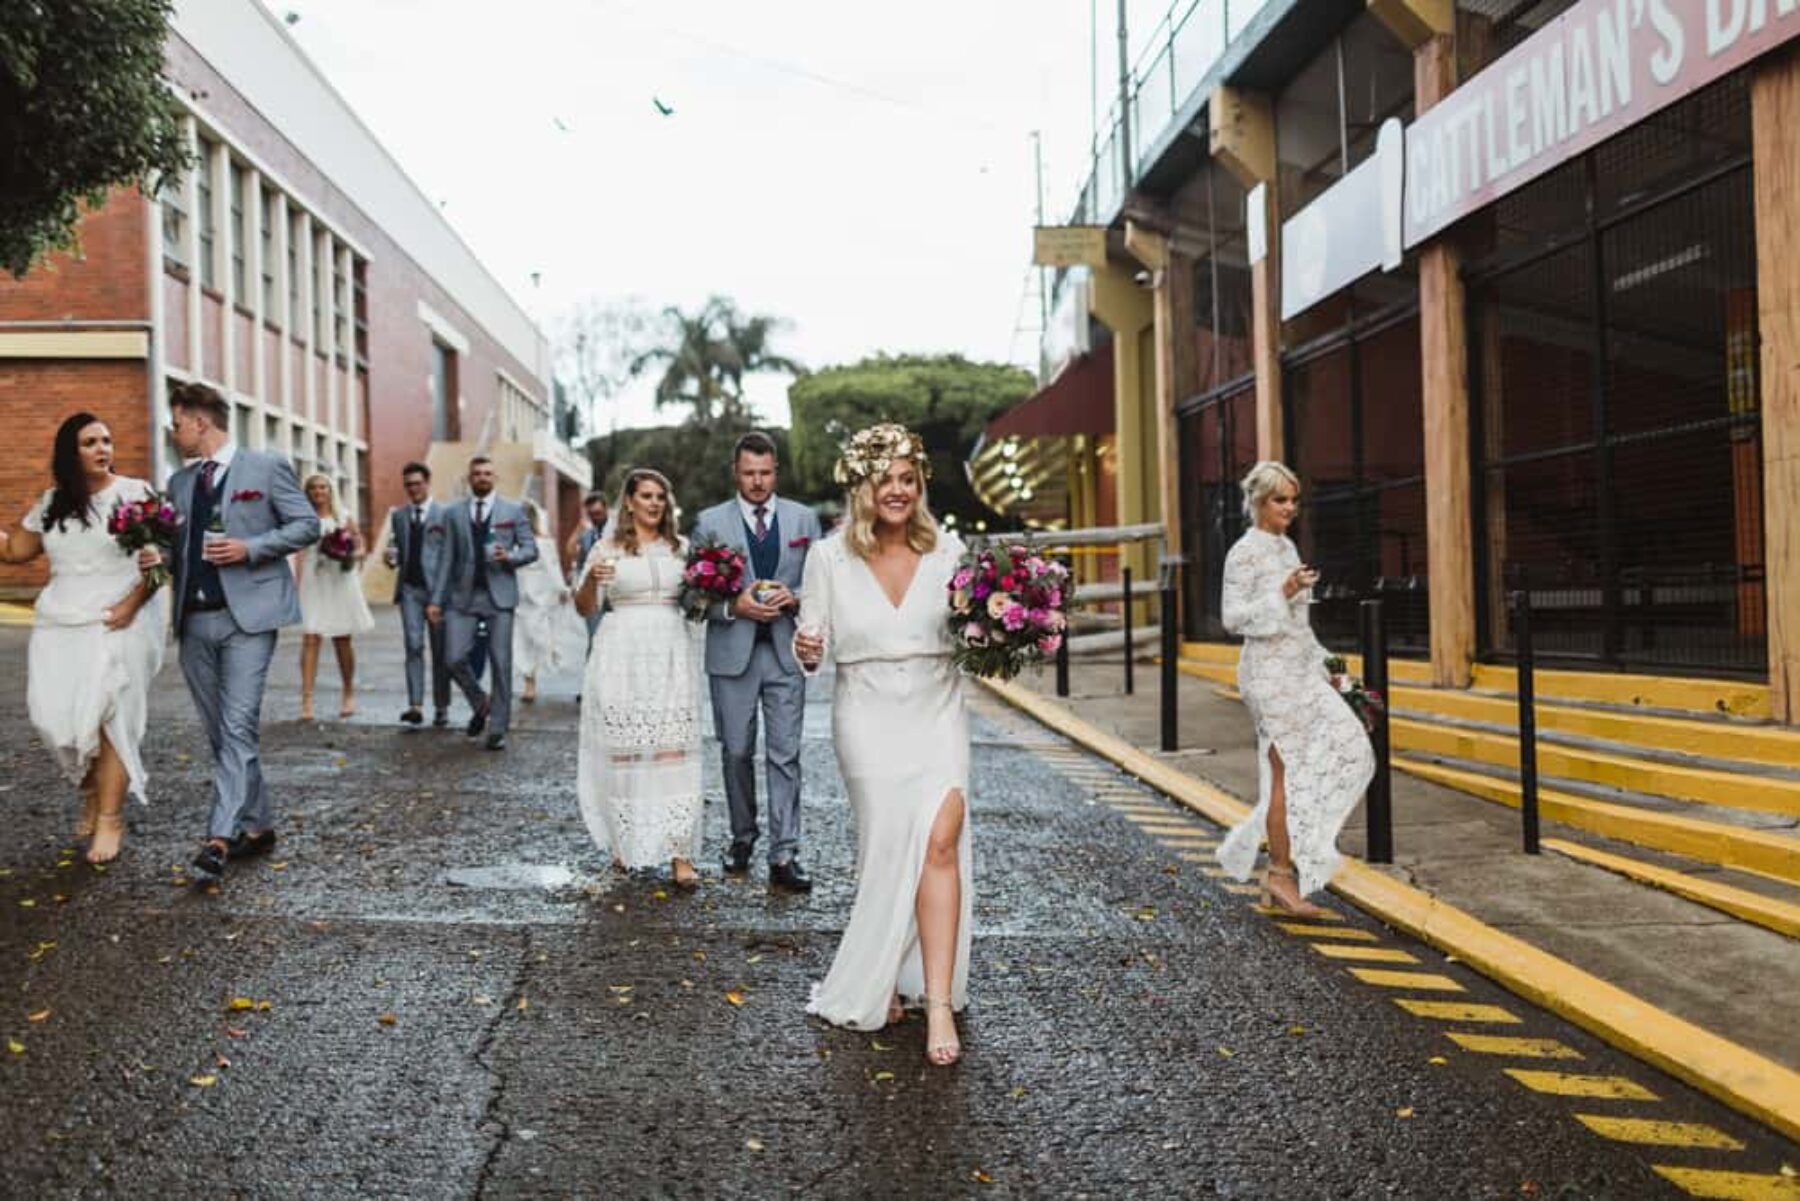 quirky & colourful wedding at Brisbane Showgrounds - photography by Janneke Storm